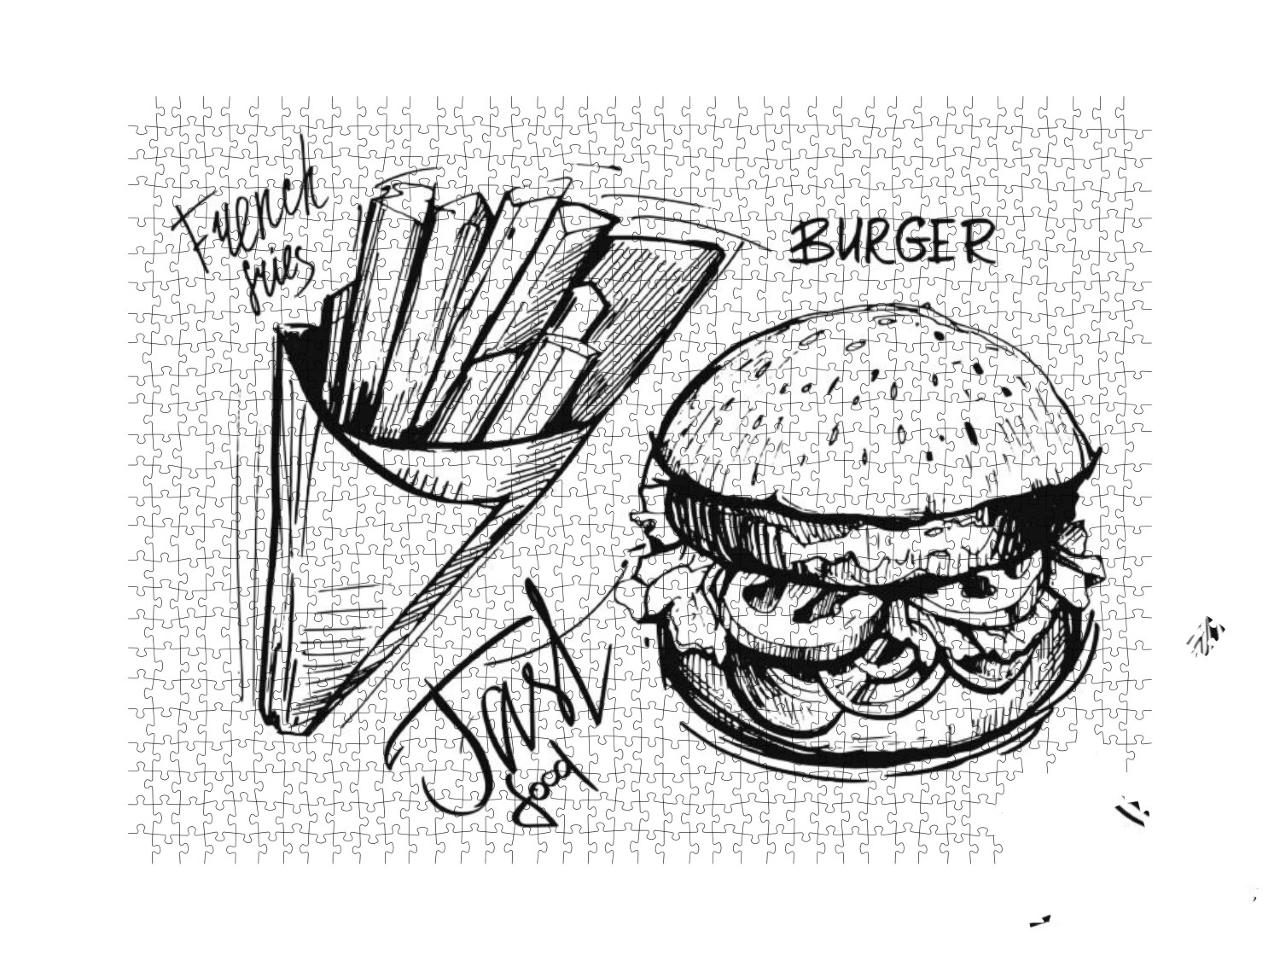 French Fries & Burger. Hand Drawn Sketch Converted to Vec... Jigsaw Puzzle with 1000 pieces